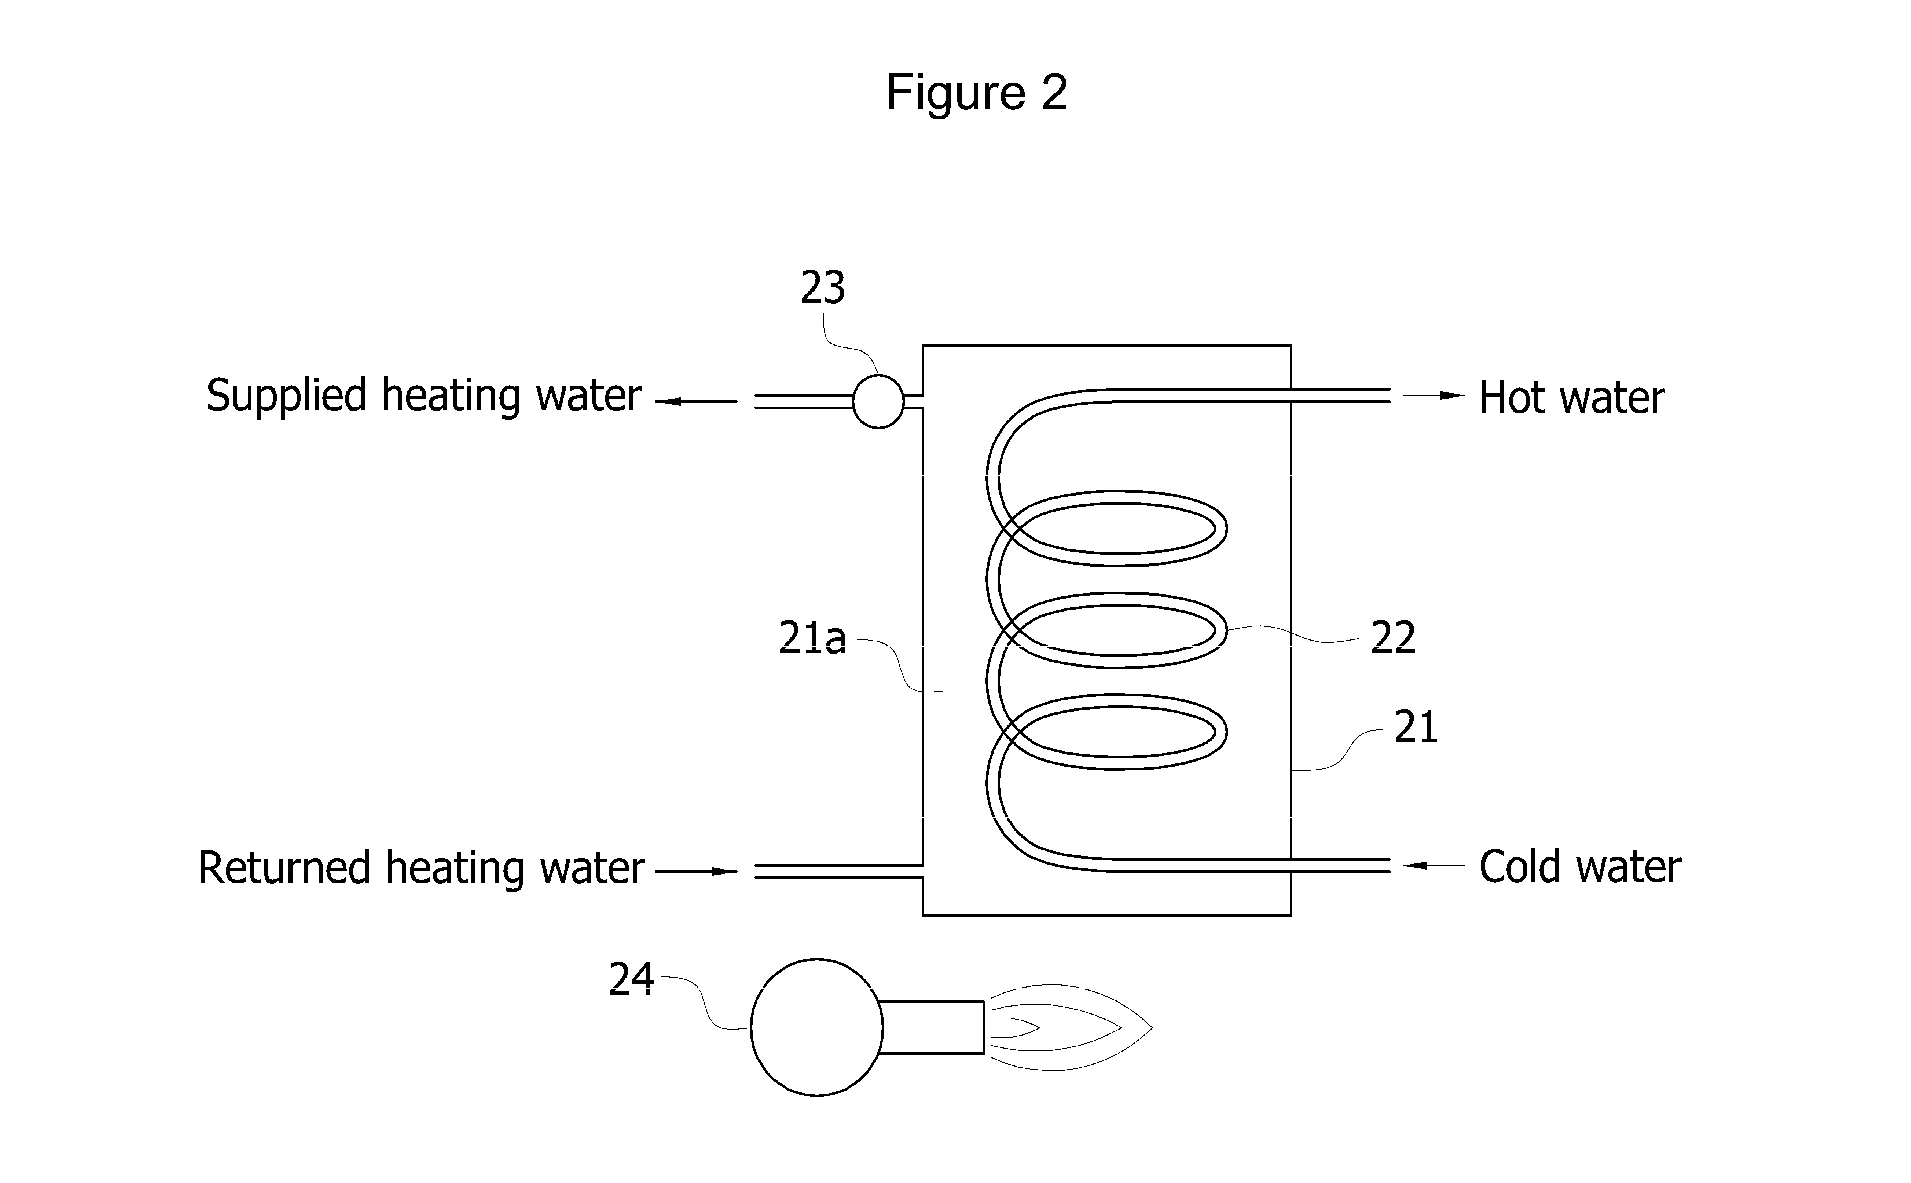 Boiler for supplying heating water and hot water simultaneously